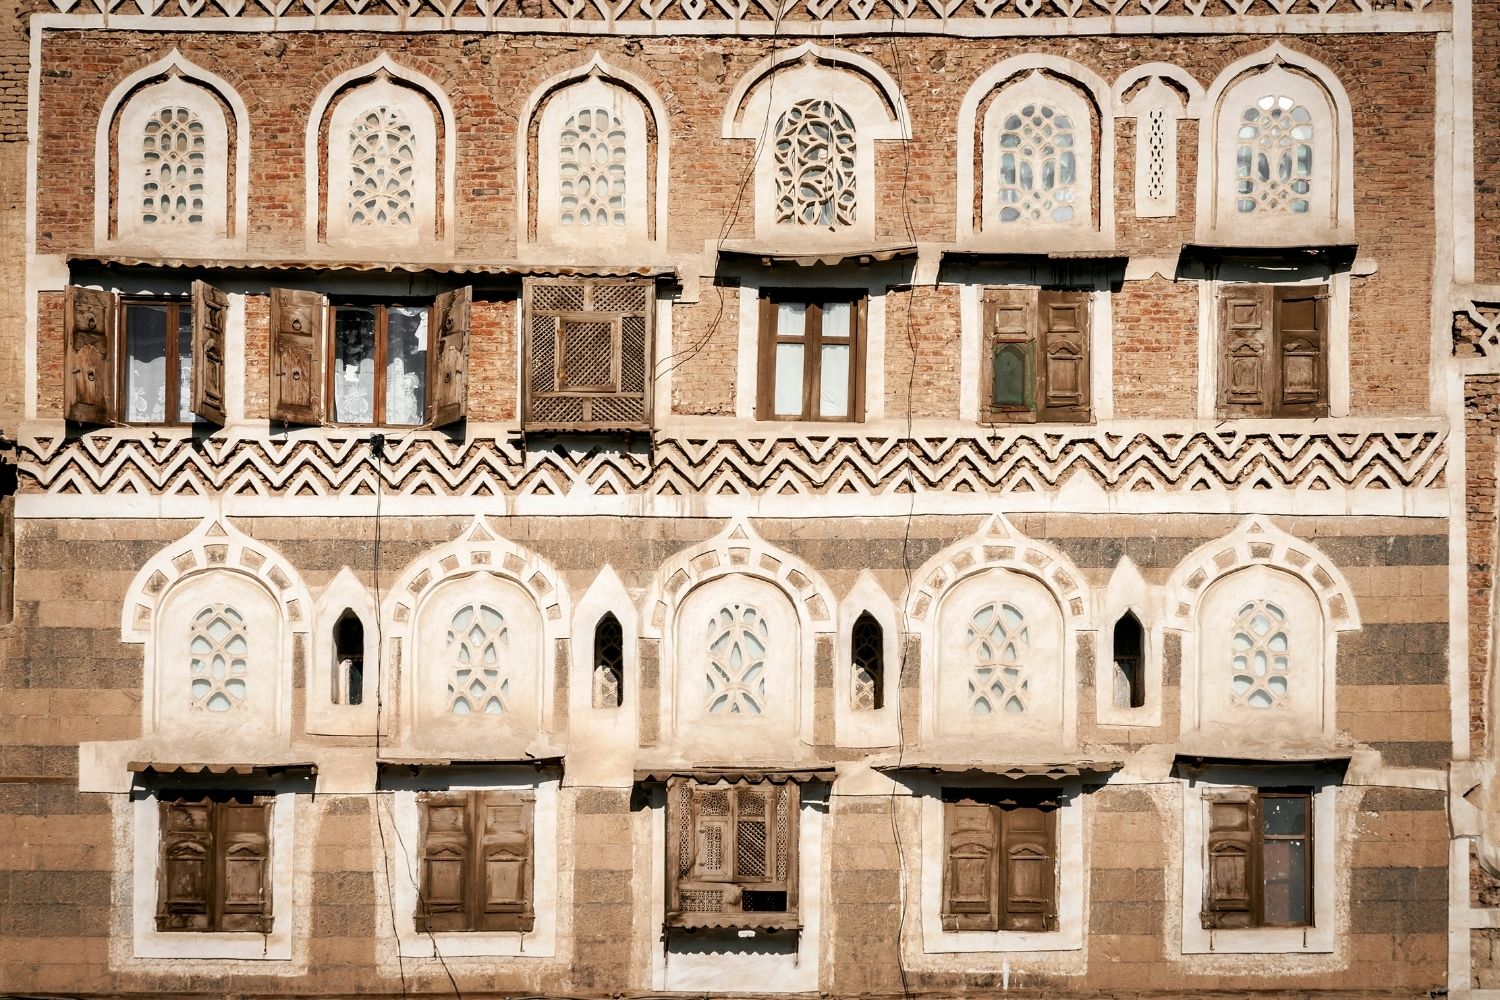 Yemen Culture and Customs » All you need to know Yemen Culture